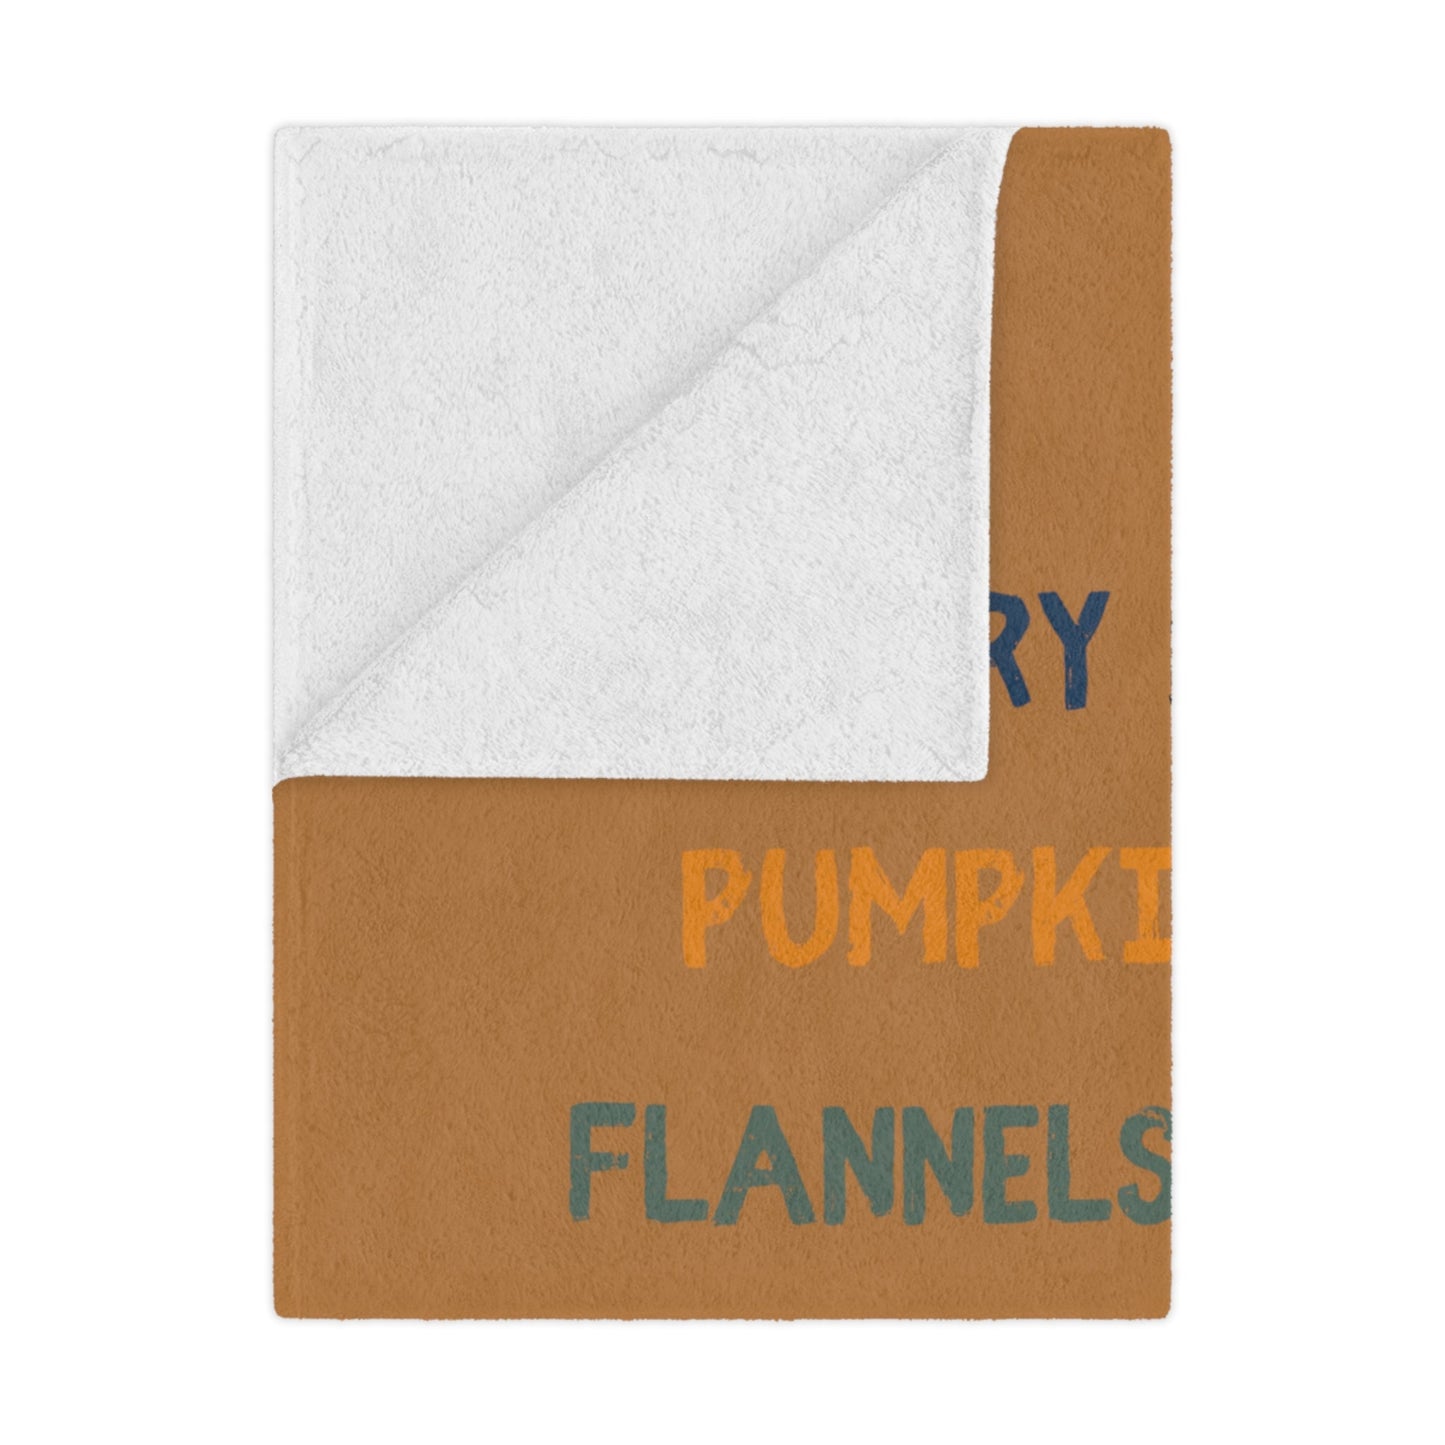 Get trendy with Fall Sh#t Blanket - Home Decor available at Good Gift Company. Grab yours for $29.95 today!